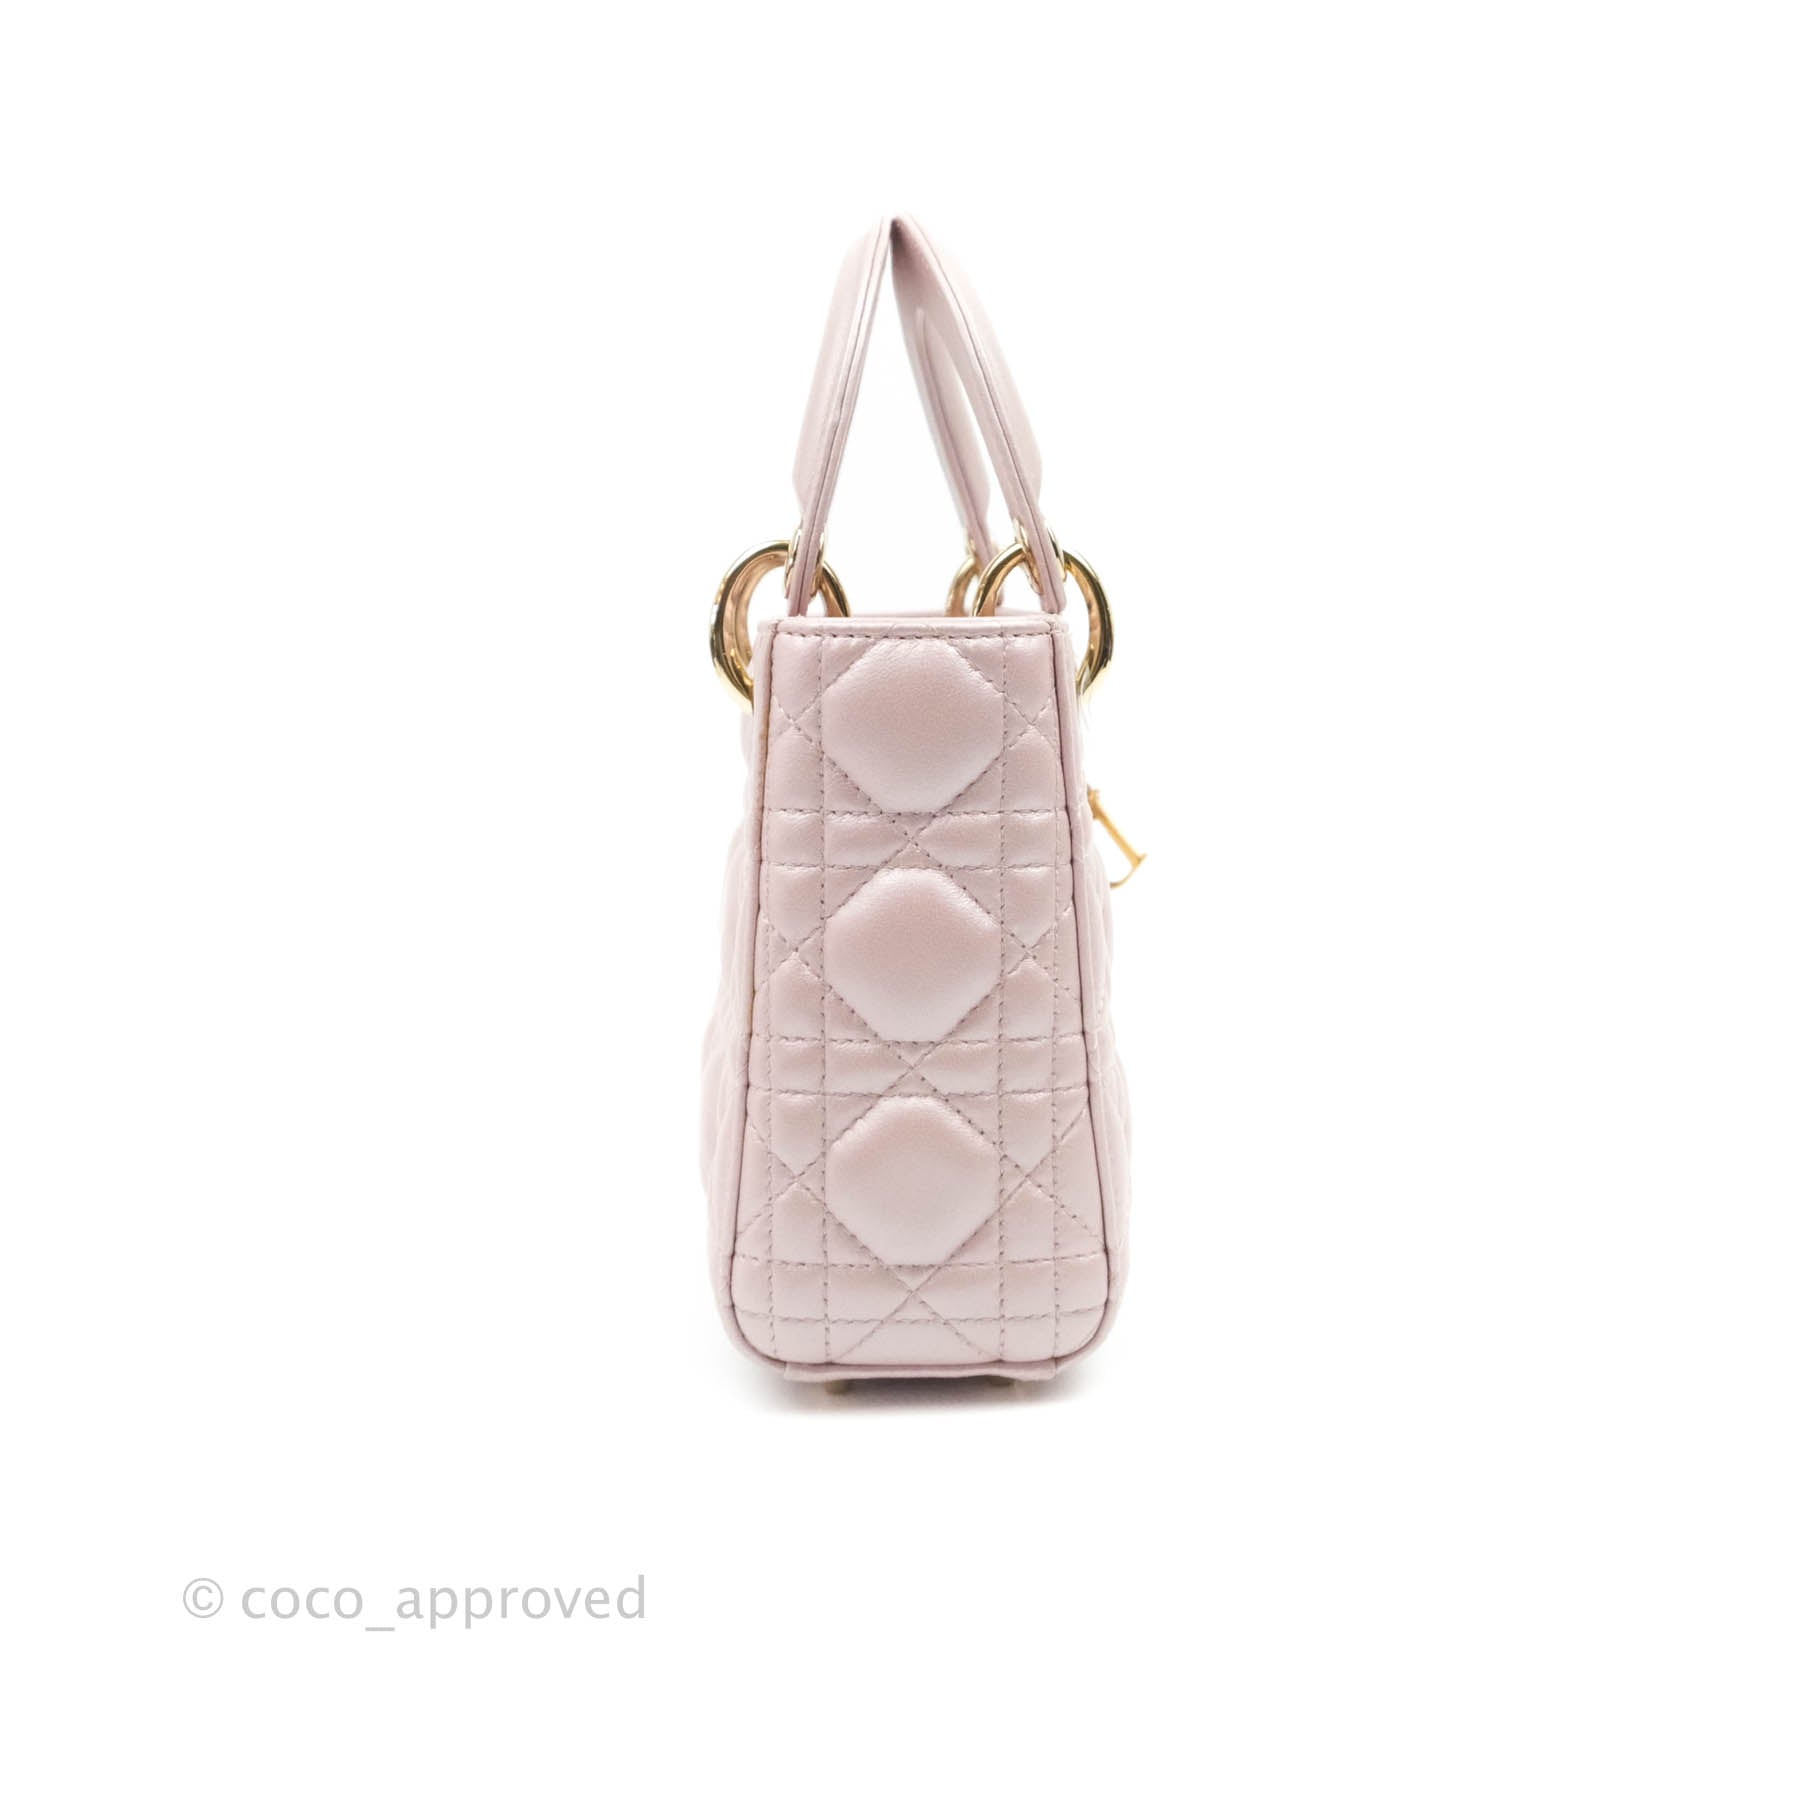 Dior - Lady Dior Micro Bag Pink Cannage Lambskin with Heart Motif - Women